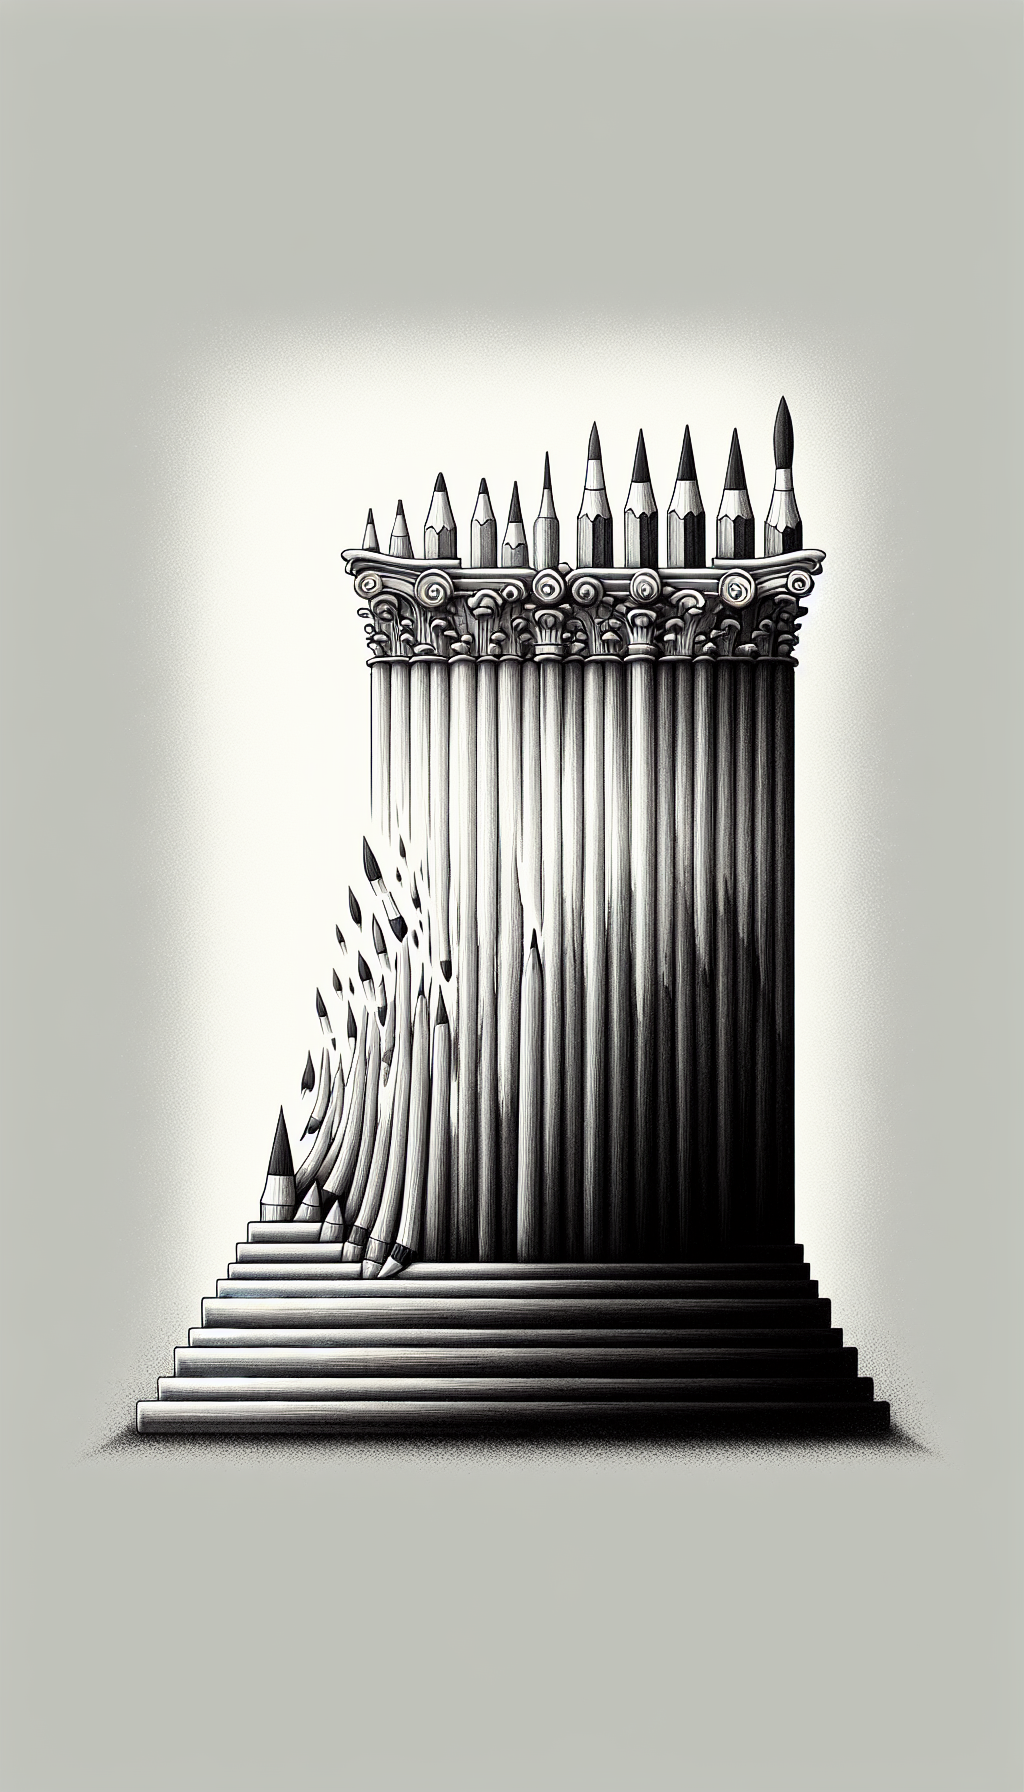 An illustration that depicts a spectrum of pencils to paintbrushes, each progressively creating broader strokes across a canvas, transitions from black to white. This grayscale gradient symbolizes value, an element of art, forming an incomplete classical column, representing the foundational aspect of value in art. The column's incomplete state suggests the ongoing exploration of understanding within the creative realm.